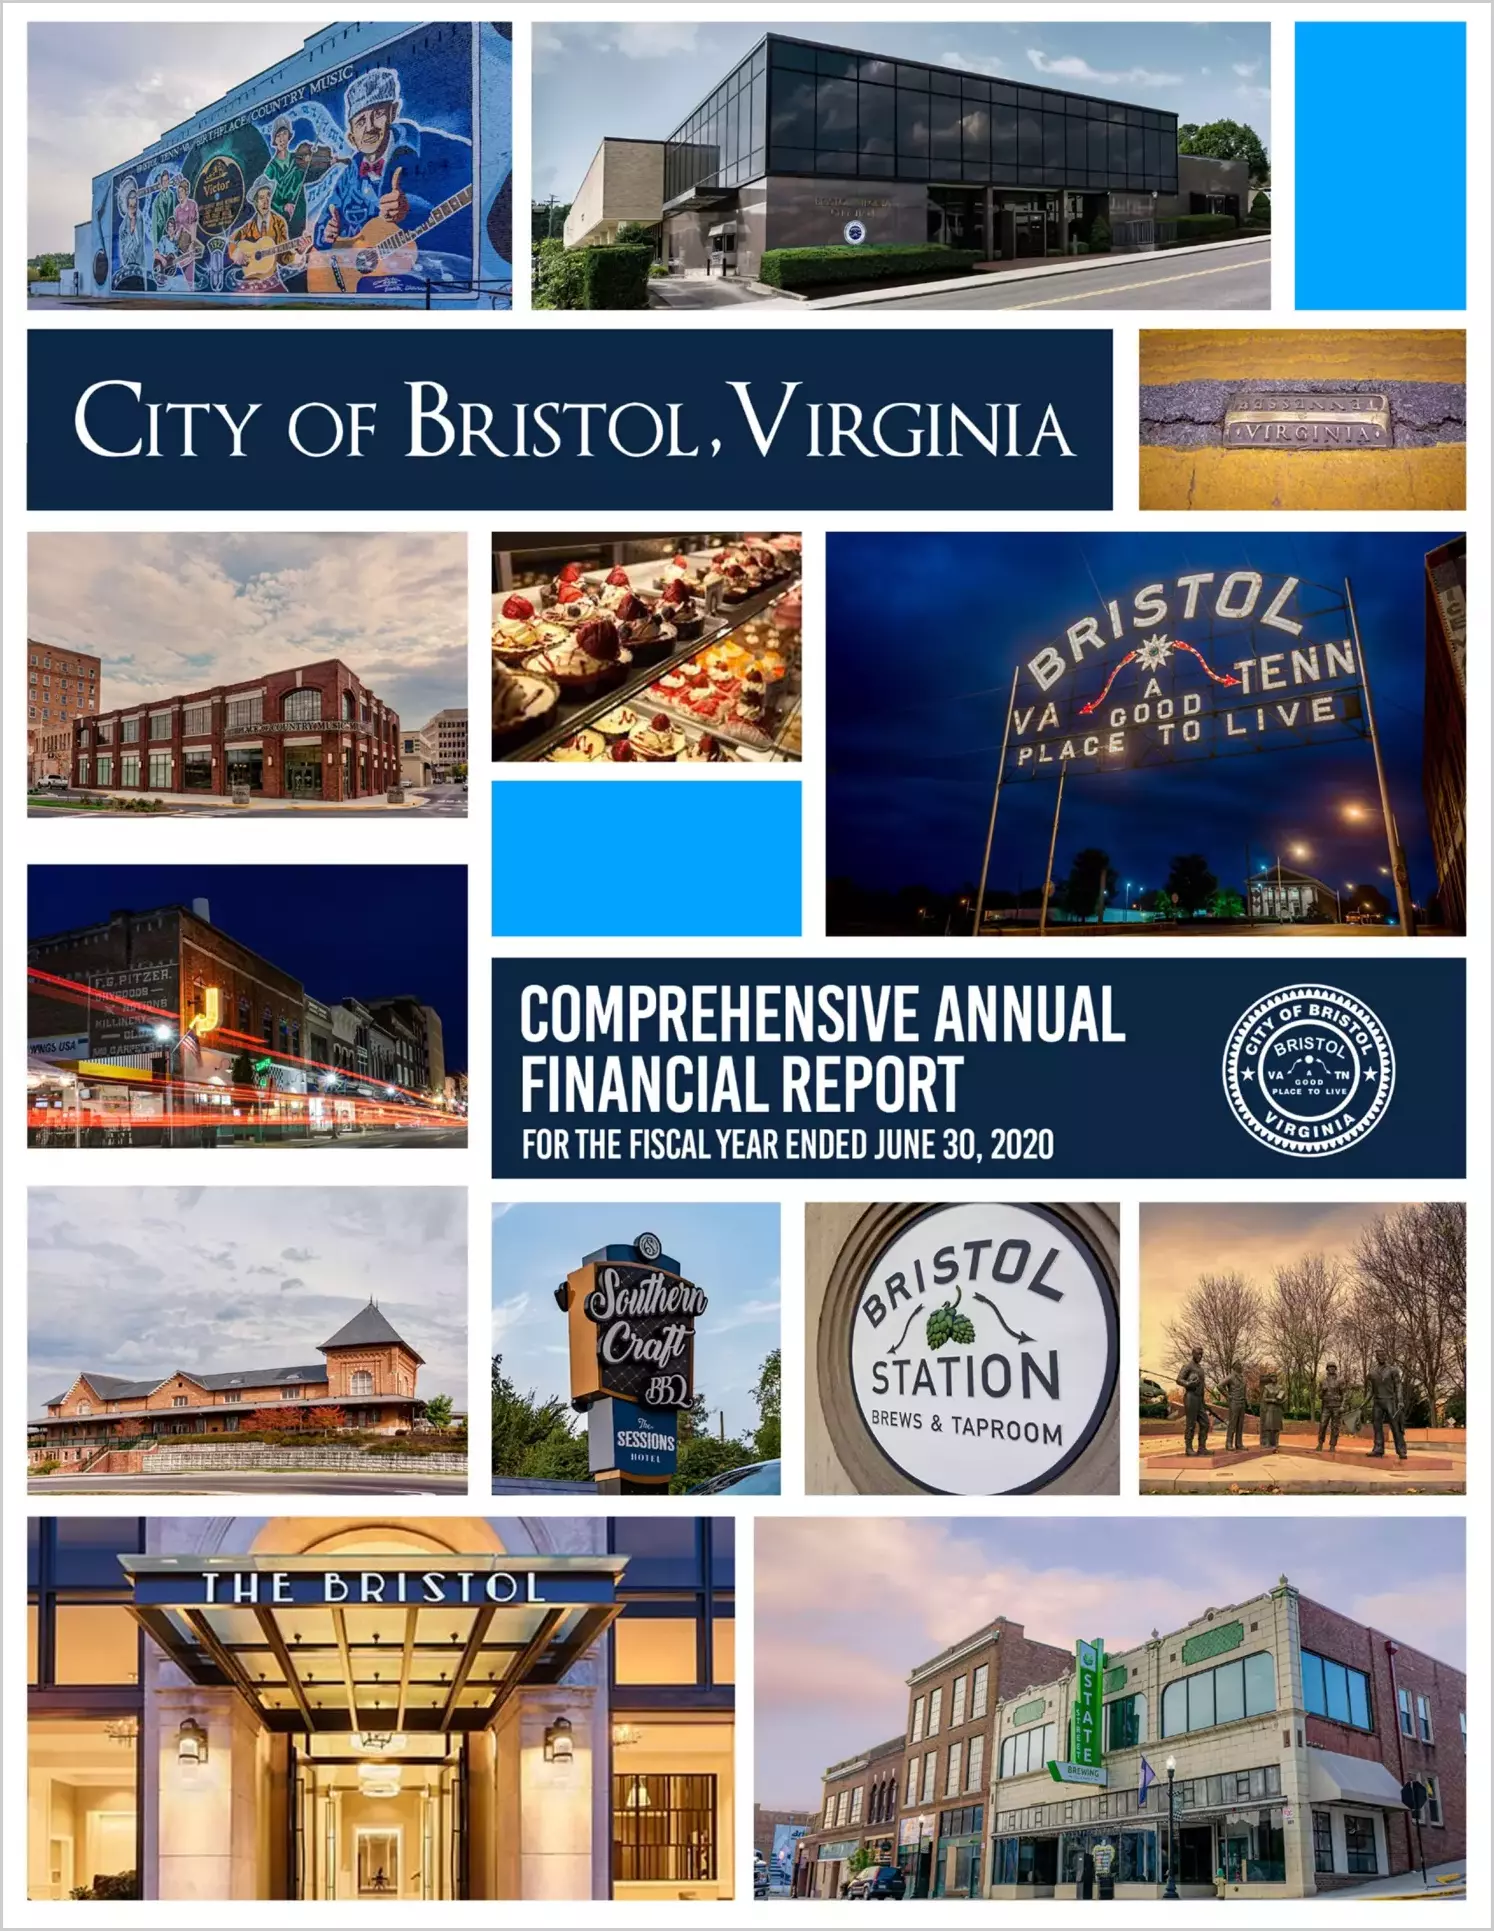 2020 Annual Financial Report for City of Bristol